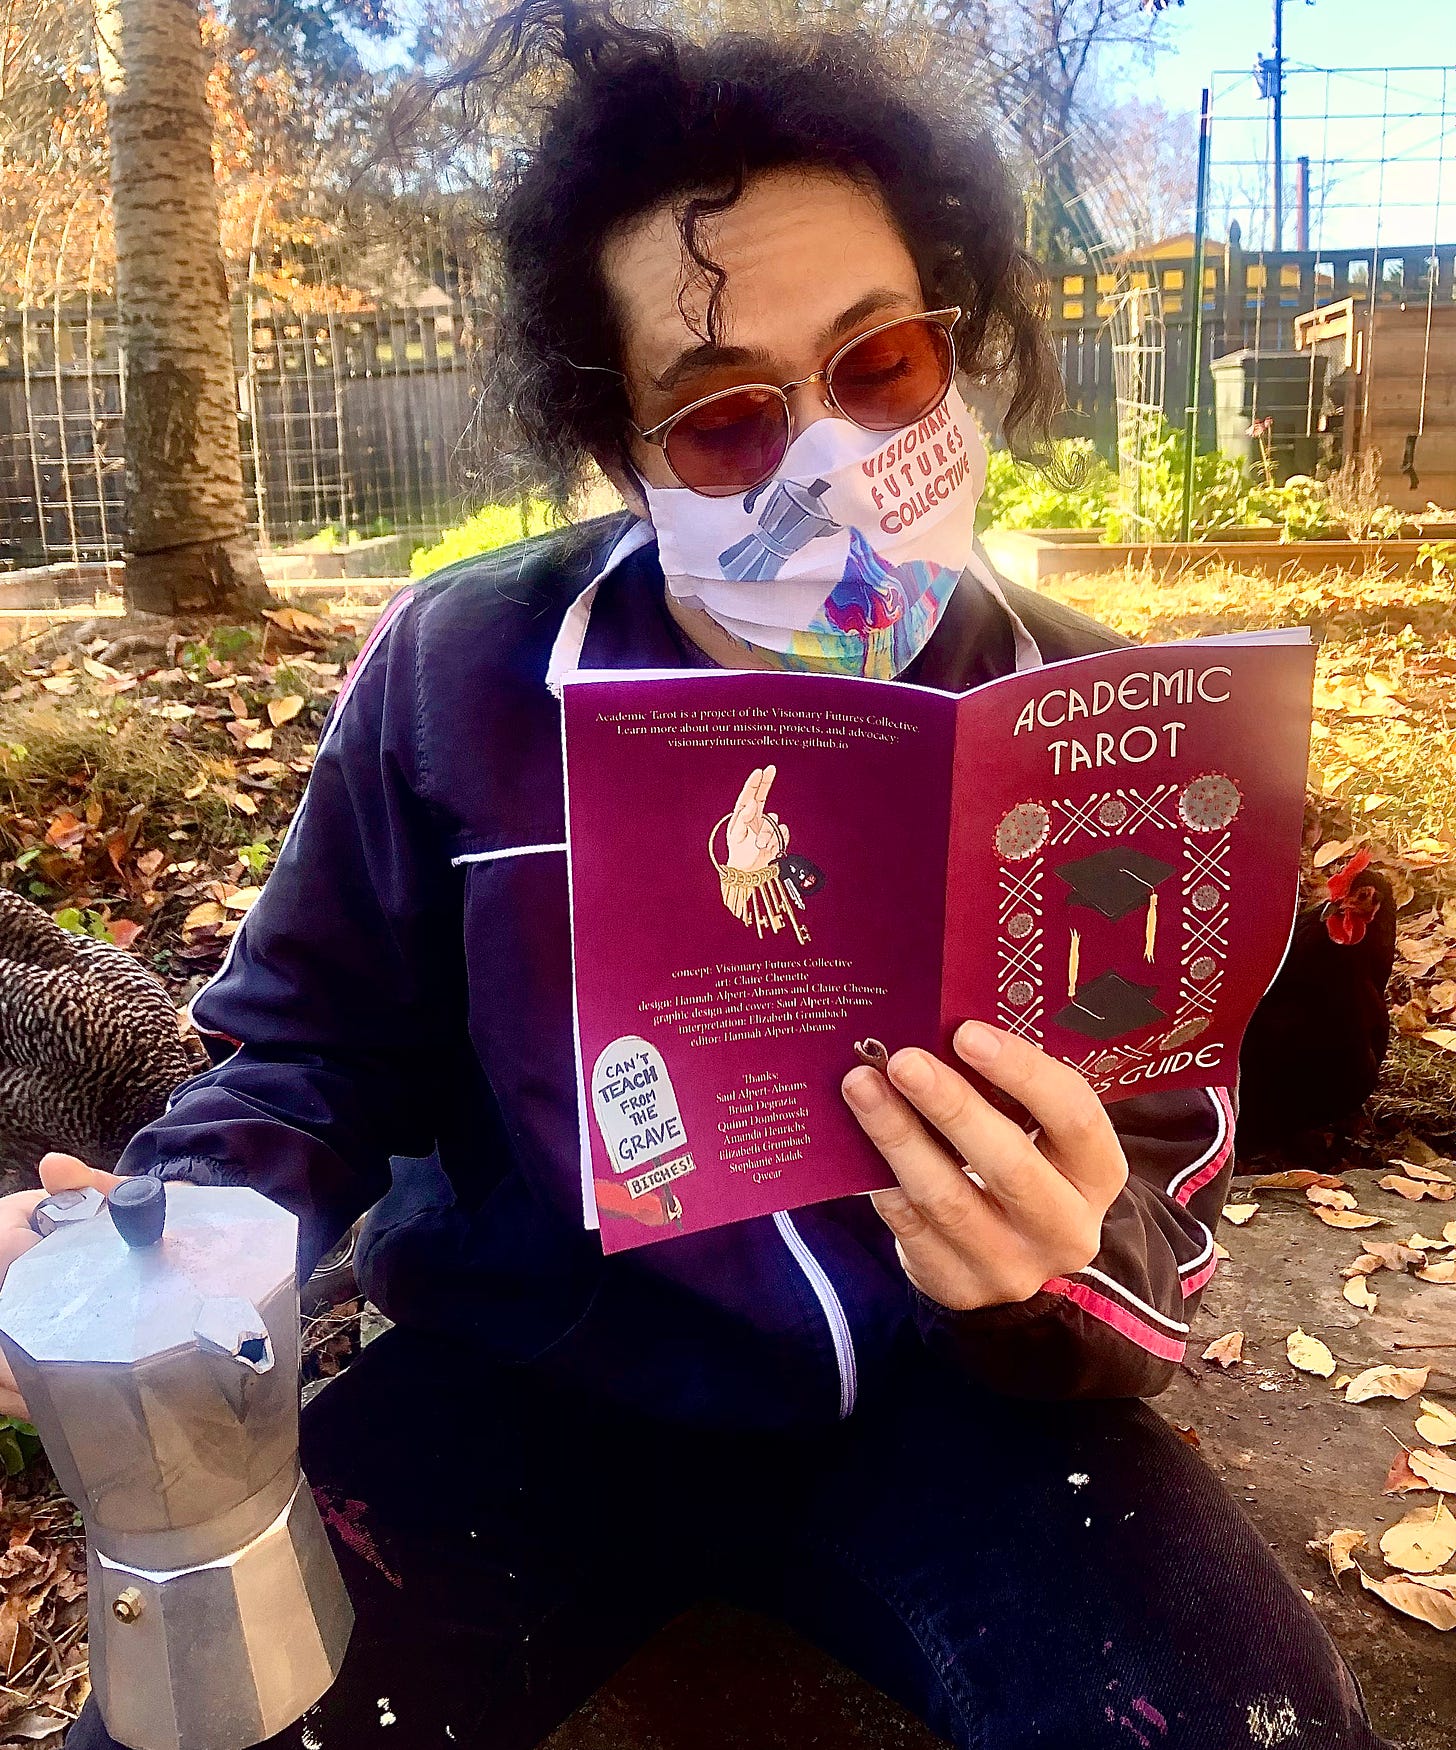 A white man with curly hair holds a Moka pot while reading the Academic Tarot reader's guide in a sunny autumnal courtyard, while chickens look on.